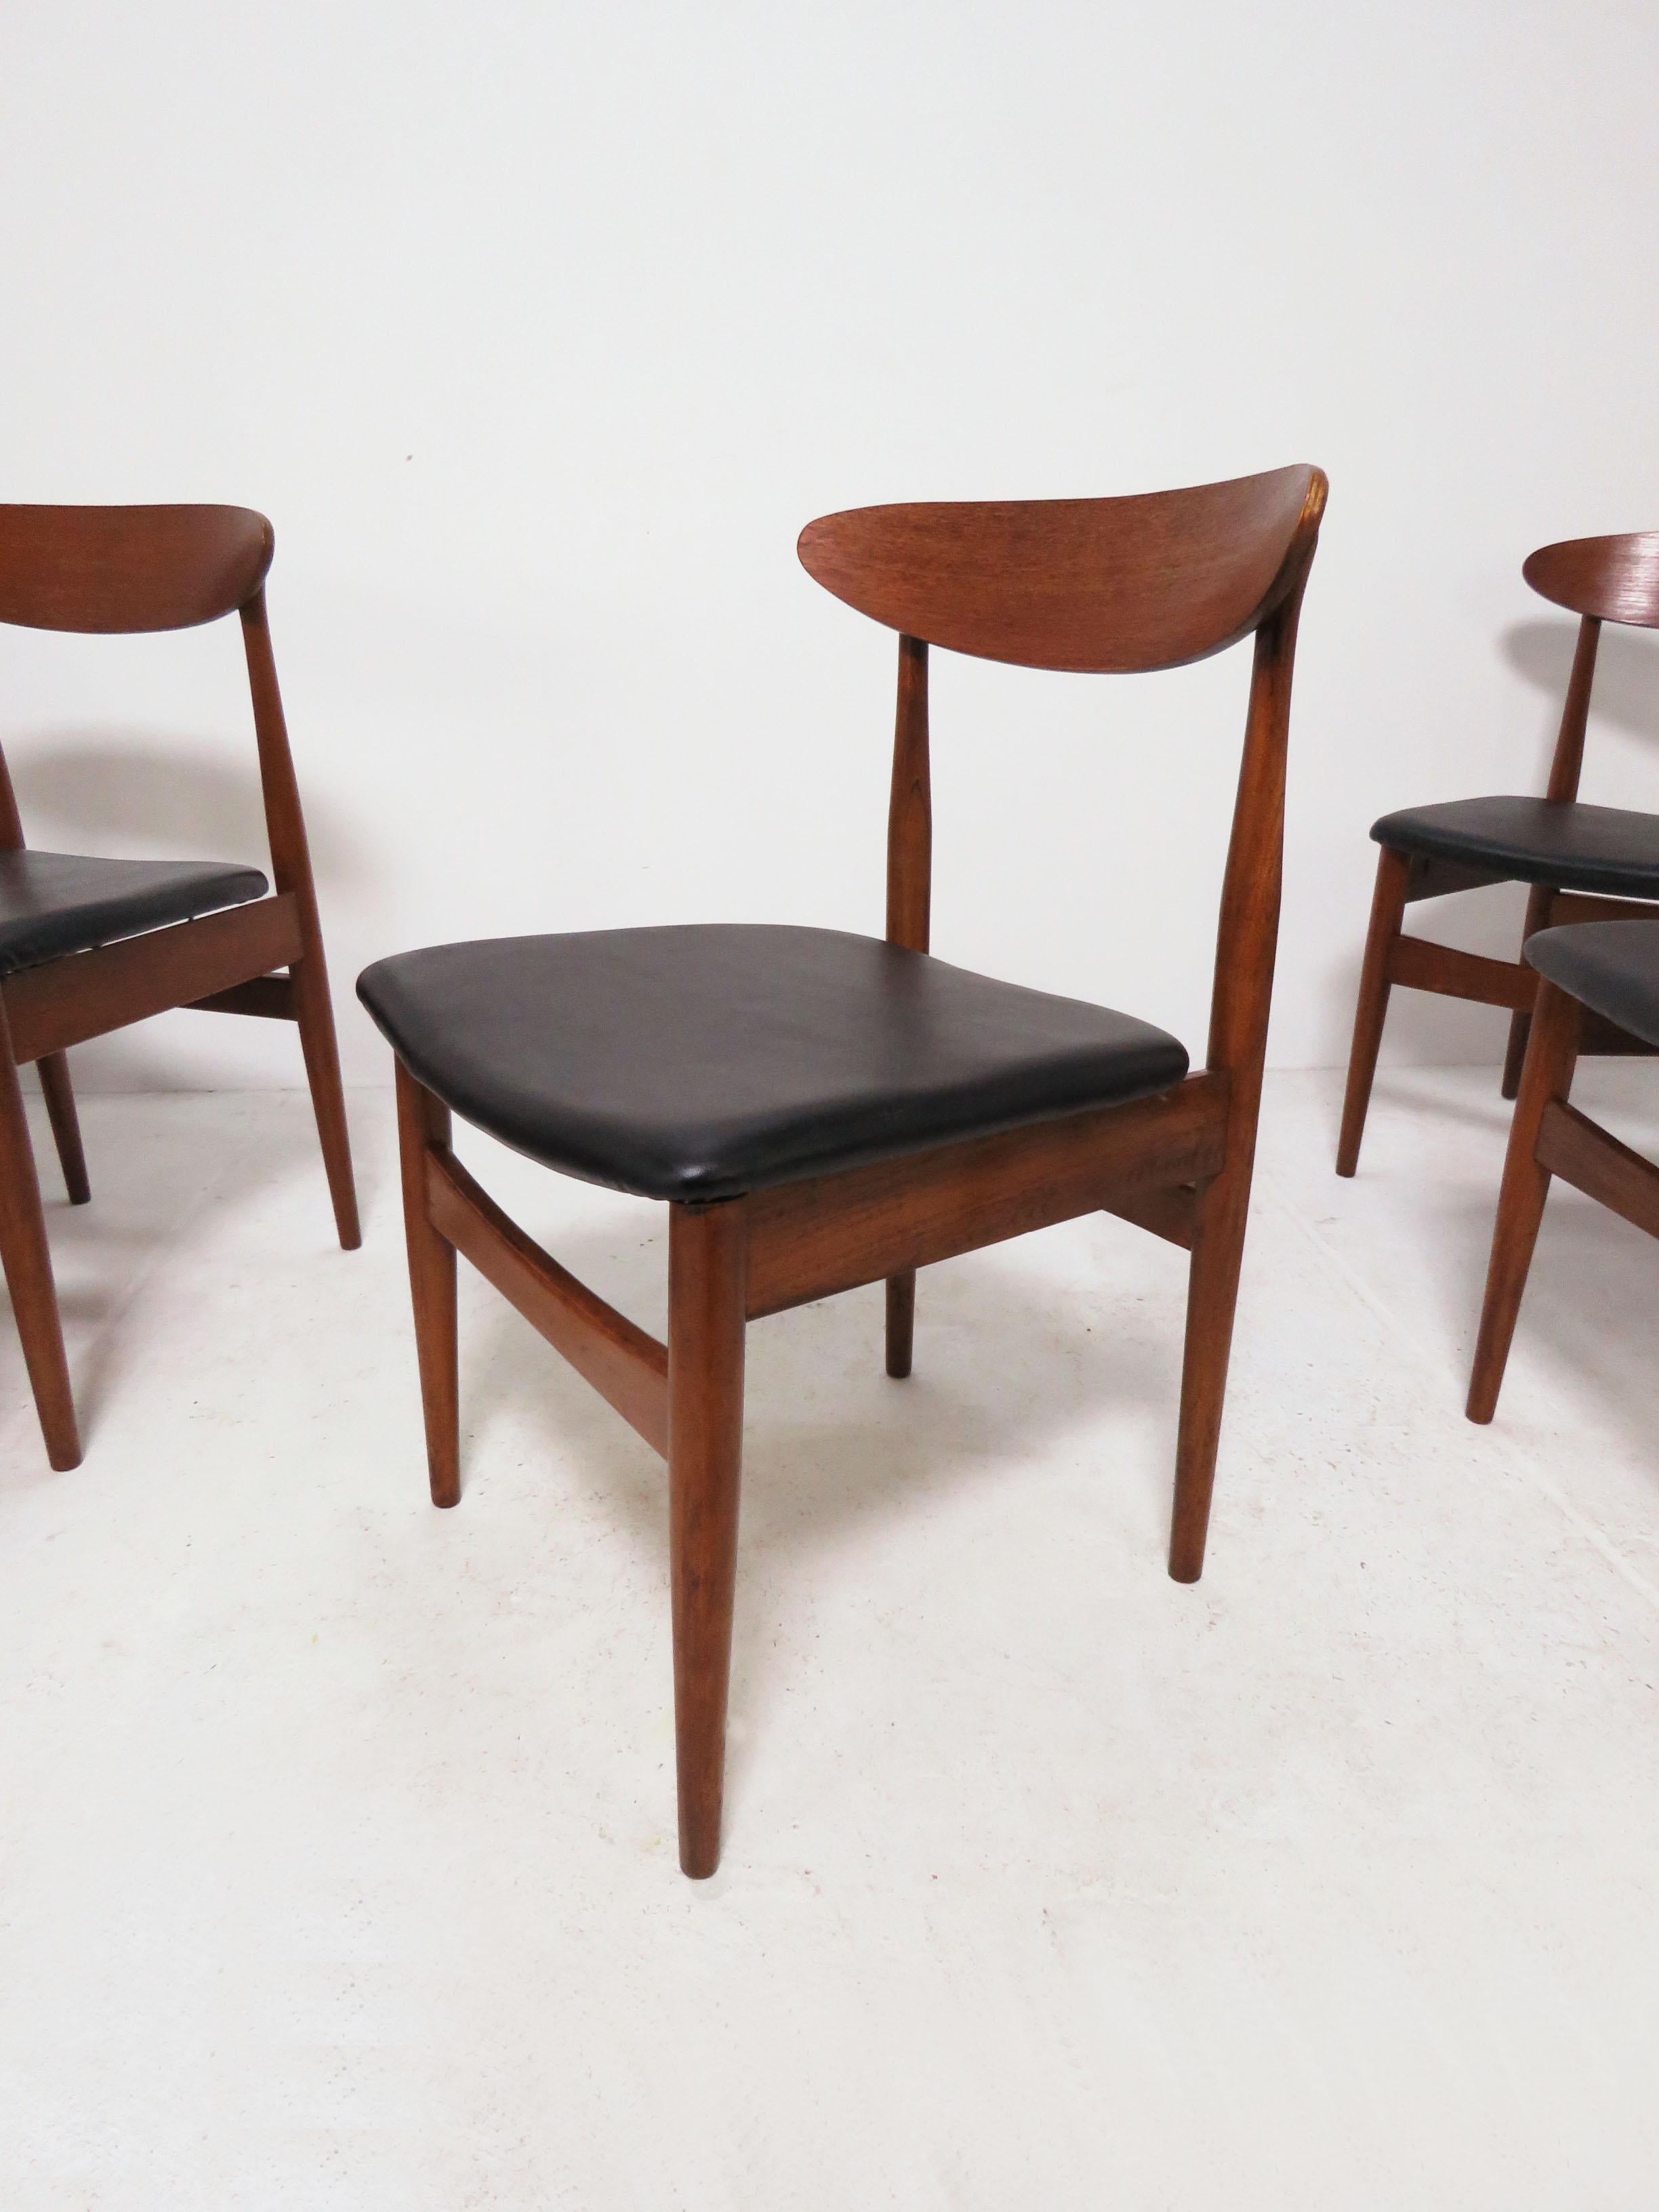 Set of eight Classic teak Danish dining chairs with carved teak backs, circa 1950s. Unmarked, but in the manner of Aksel Bender-Madsen and Ejner Larsen.